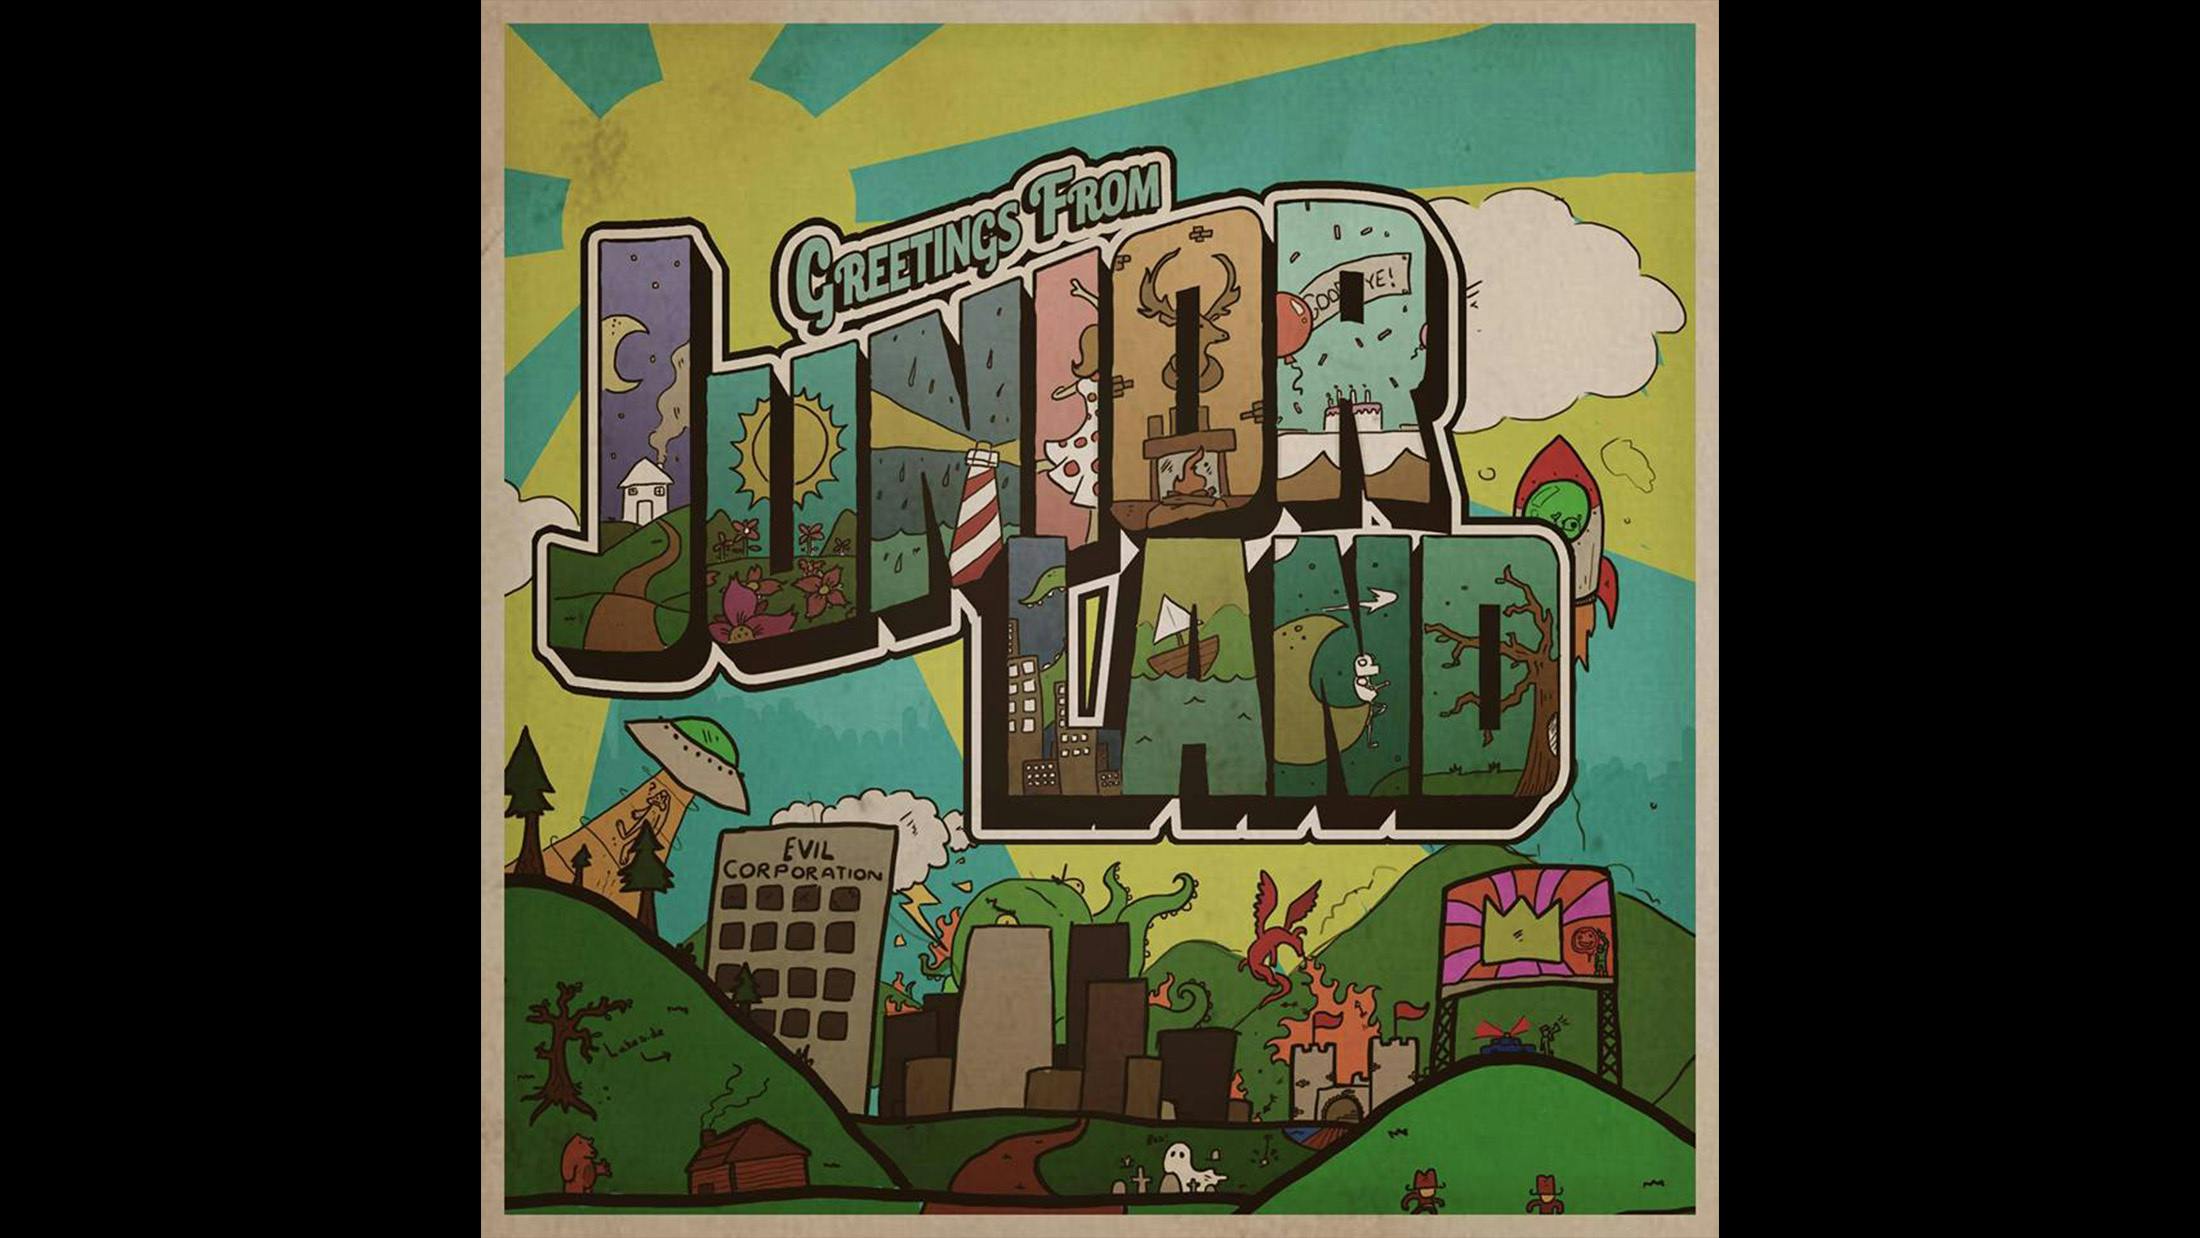 Concept albums and pop-punk aren’t two things that normally go hand-in-hand, but Welsh trio Junior aren’t your normal pop-punk band. 2015’s excellent Juniorland EP got the deluxe reissue treatment this year, and while that doesn’t exactly make this a ‘new’ release, it’s one that didn’t initially get the recognition it deserved. Plus, Junior are one of our favourite new bands, so we’re having 'em in this list! Juniorland is a concept EP with a retro-suburbia setting and intertwining storylines, and a sound that owes a fair amount to self-titled-era blink-182. The stand-out song comes in the form of A House That’s Not Quite Home, a track that should strike a chord with anyone who’s had to bid farewell to a place where memories were made.